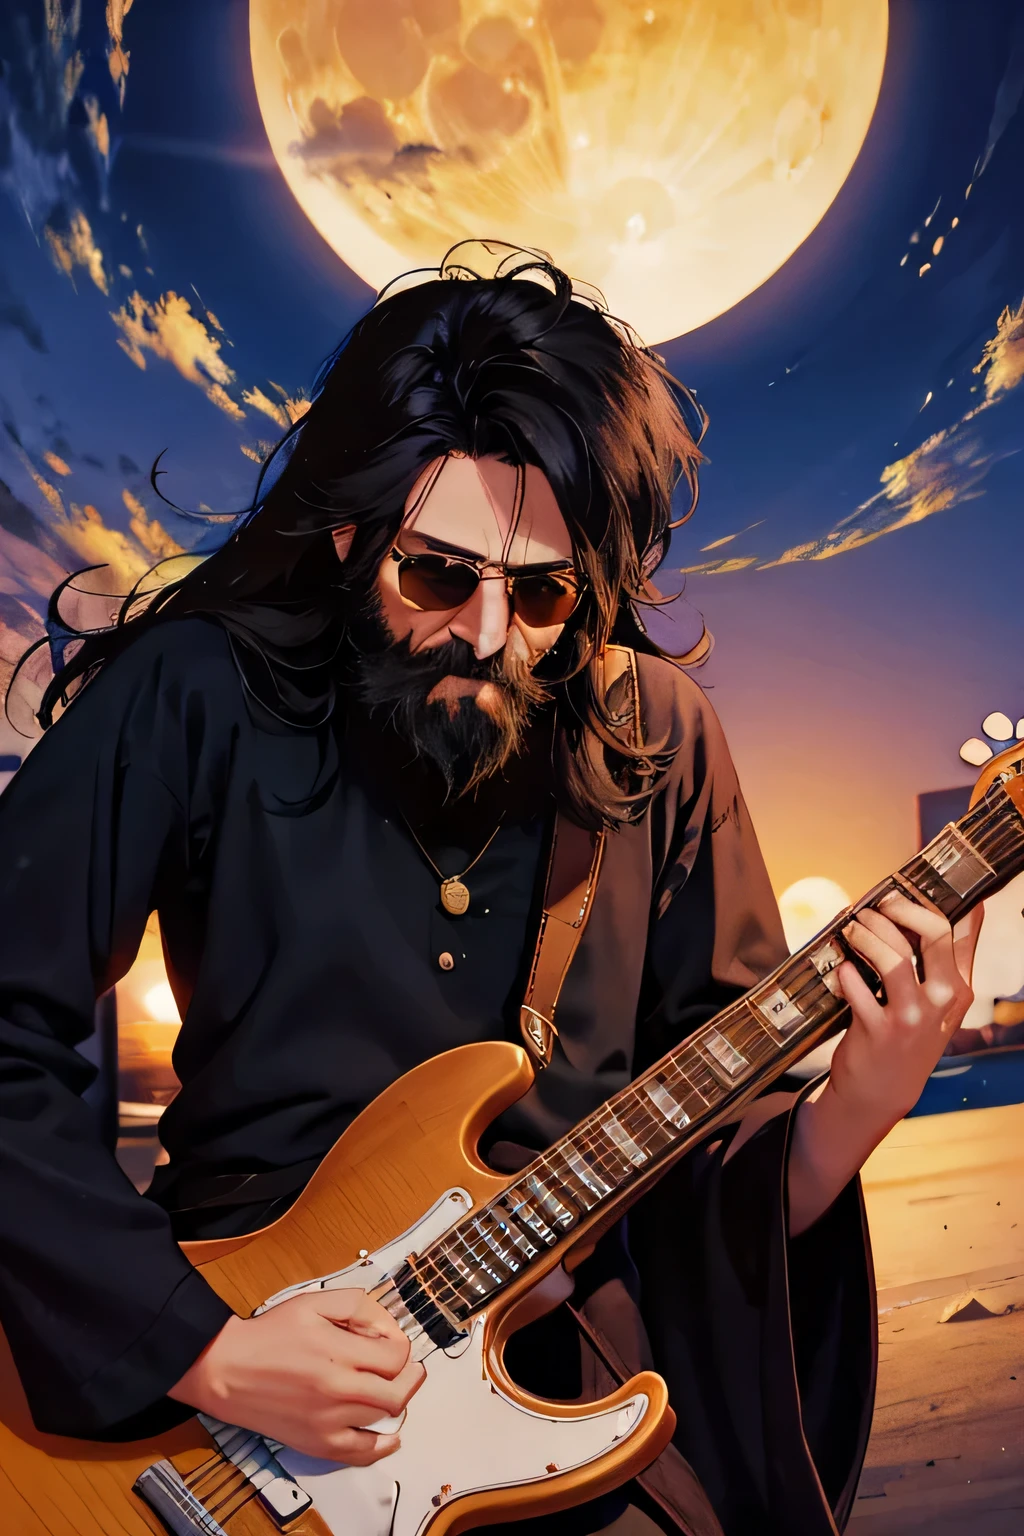 old man with beard long black hair like john lennon, playing guitar, playing a song, peace and love, the sun and the moon